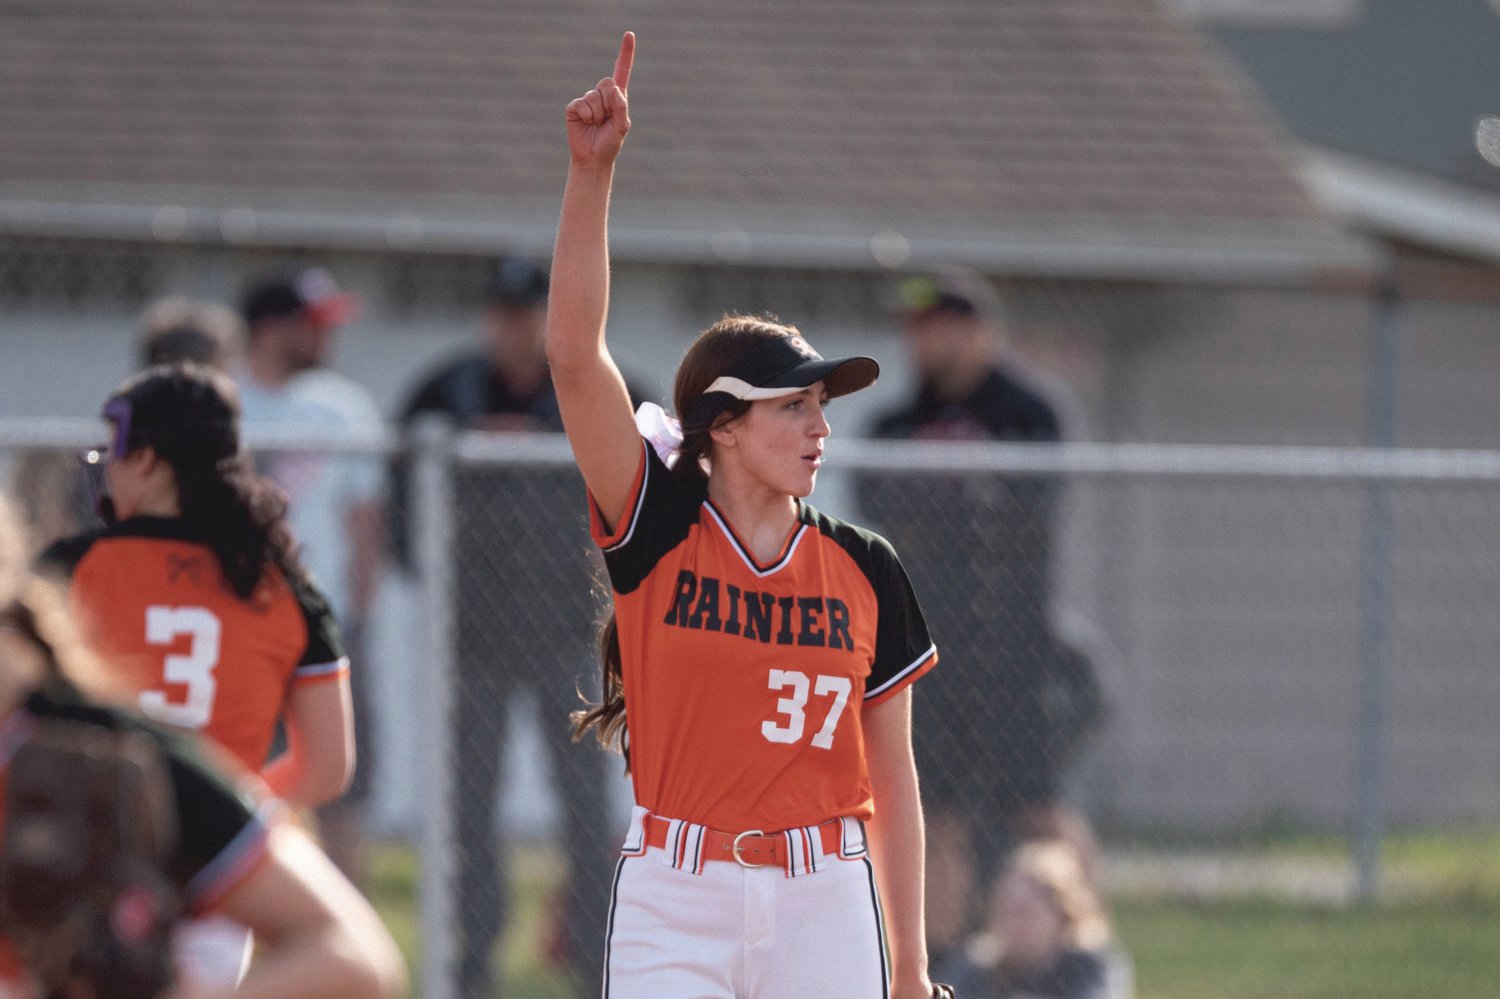 Rainier pitcher Bailey Elwell raises a finger after getting an out against Tenino on March 24. Elwell was named to The Chronicle's All-Area team after a strong 2022 season.